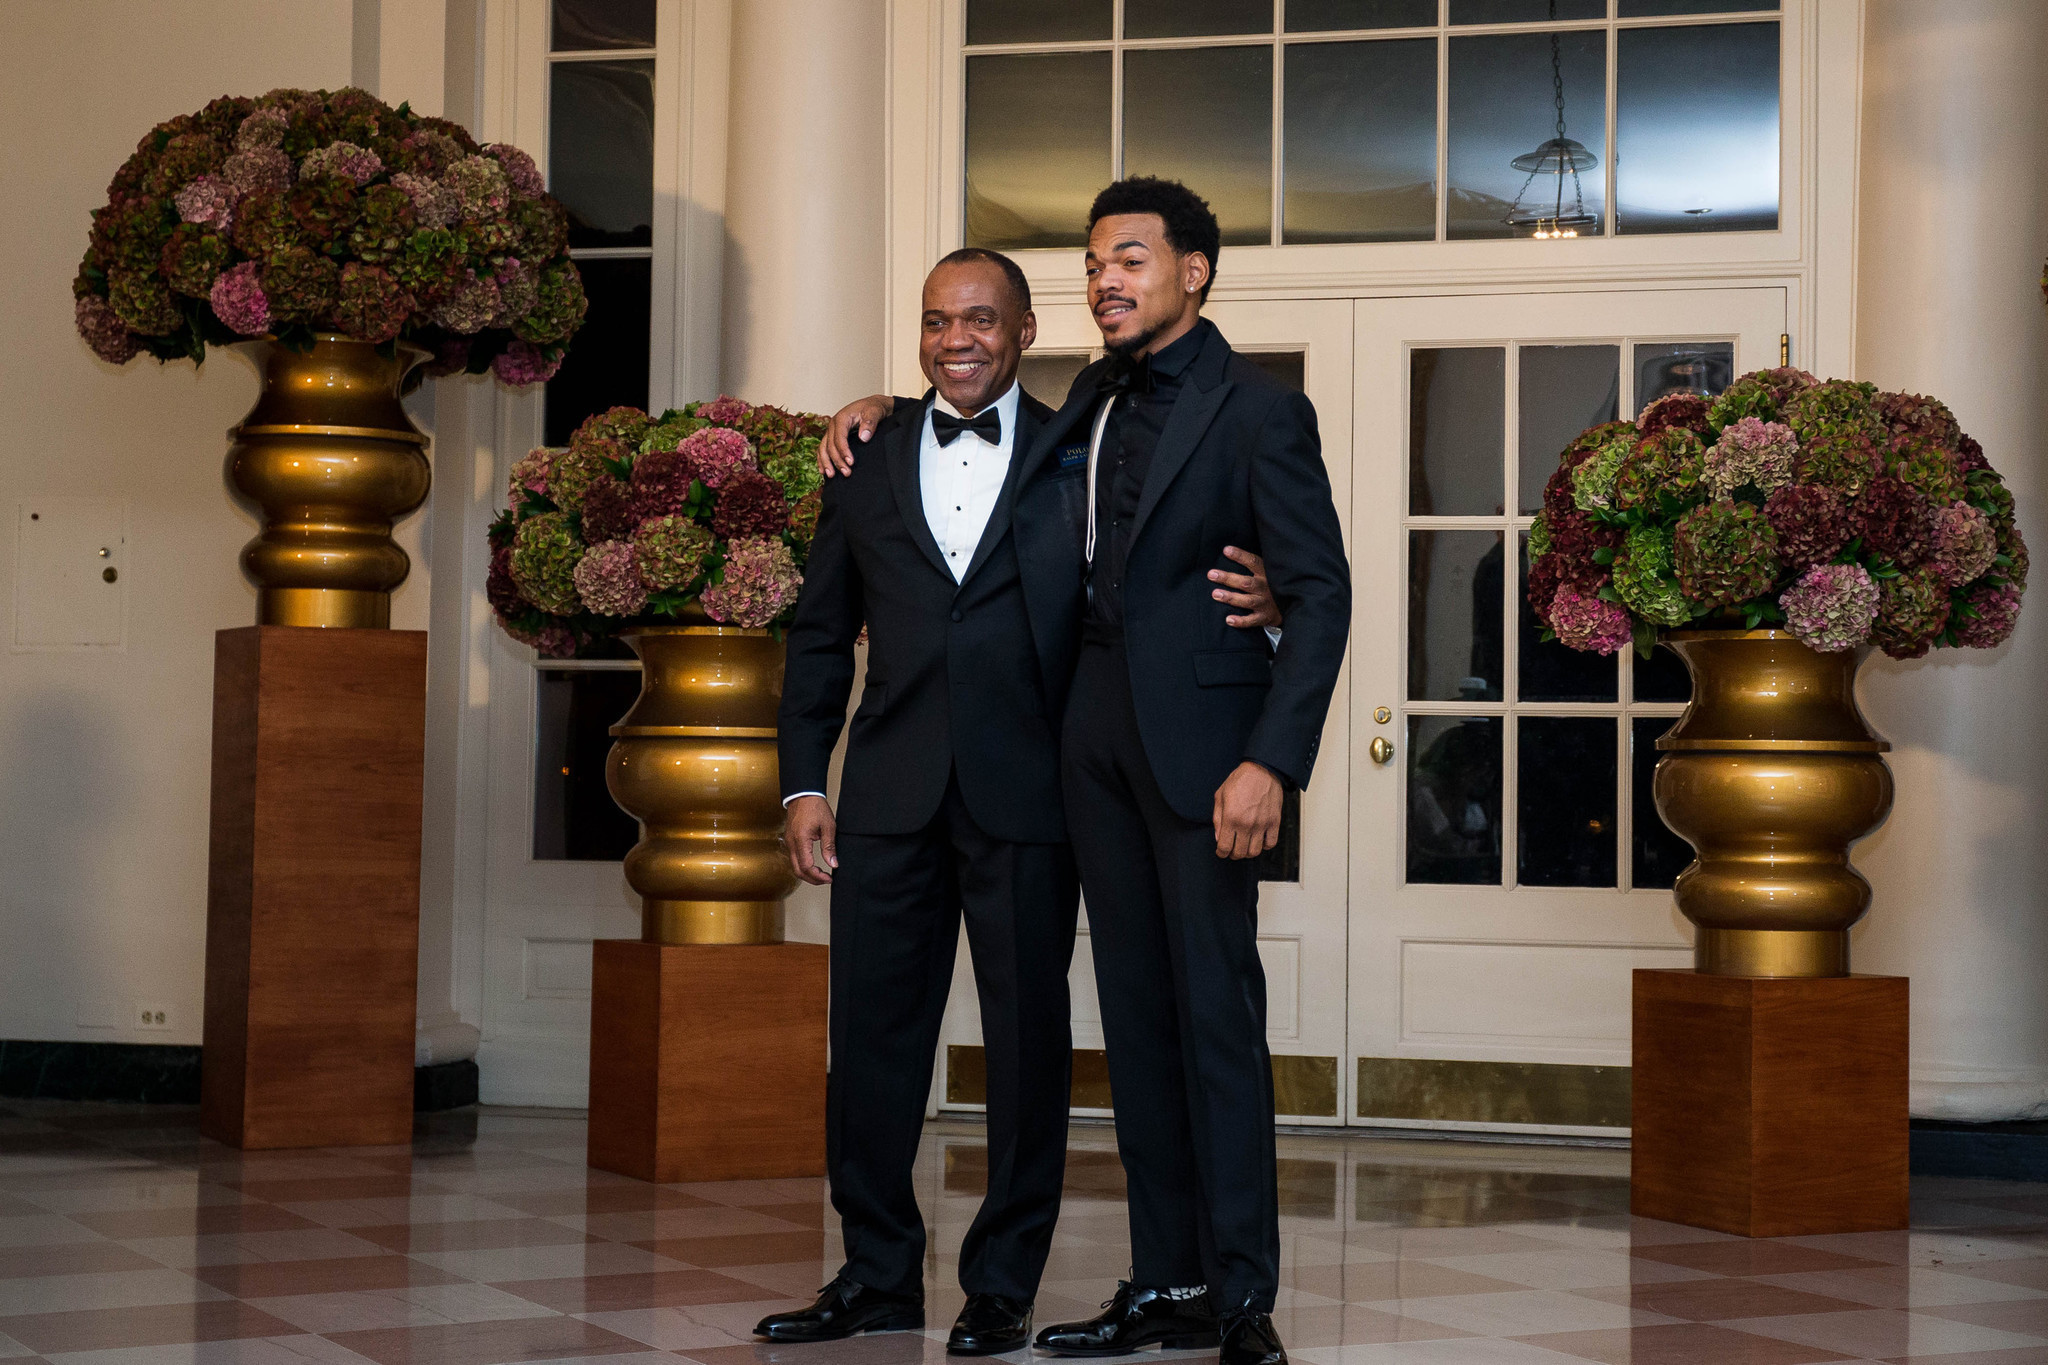 Chance the Rapper among Chicagoans at final Obama state dinner - Chicago Tribune2048 x 1365